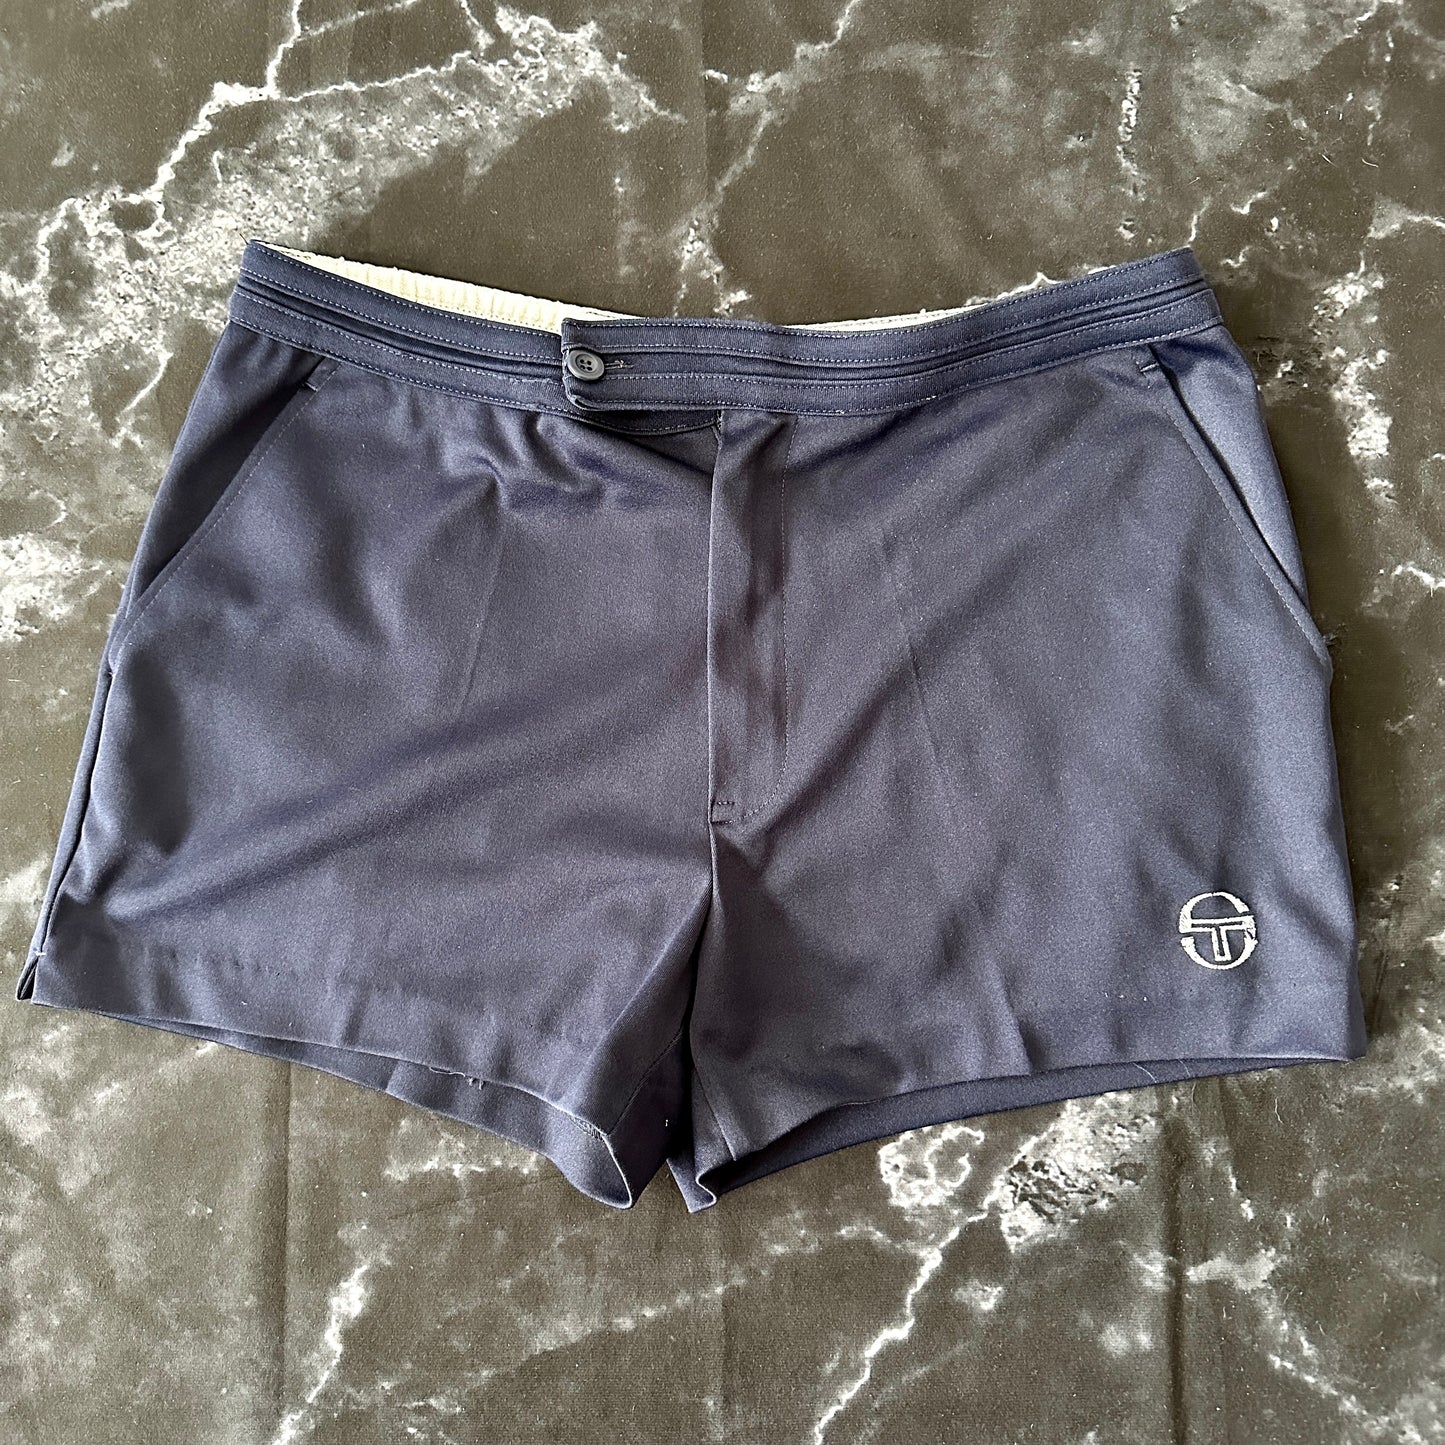 Sergio Tacchini 80s Tennis Shorts - 50 / L - Made in Italy